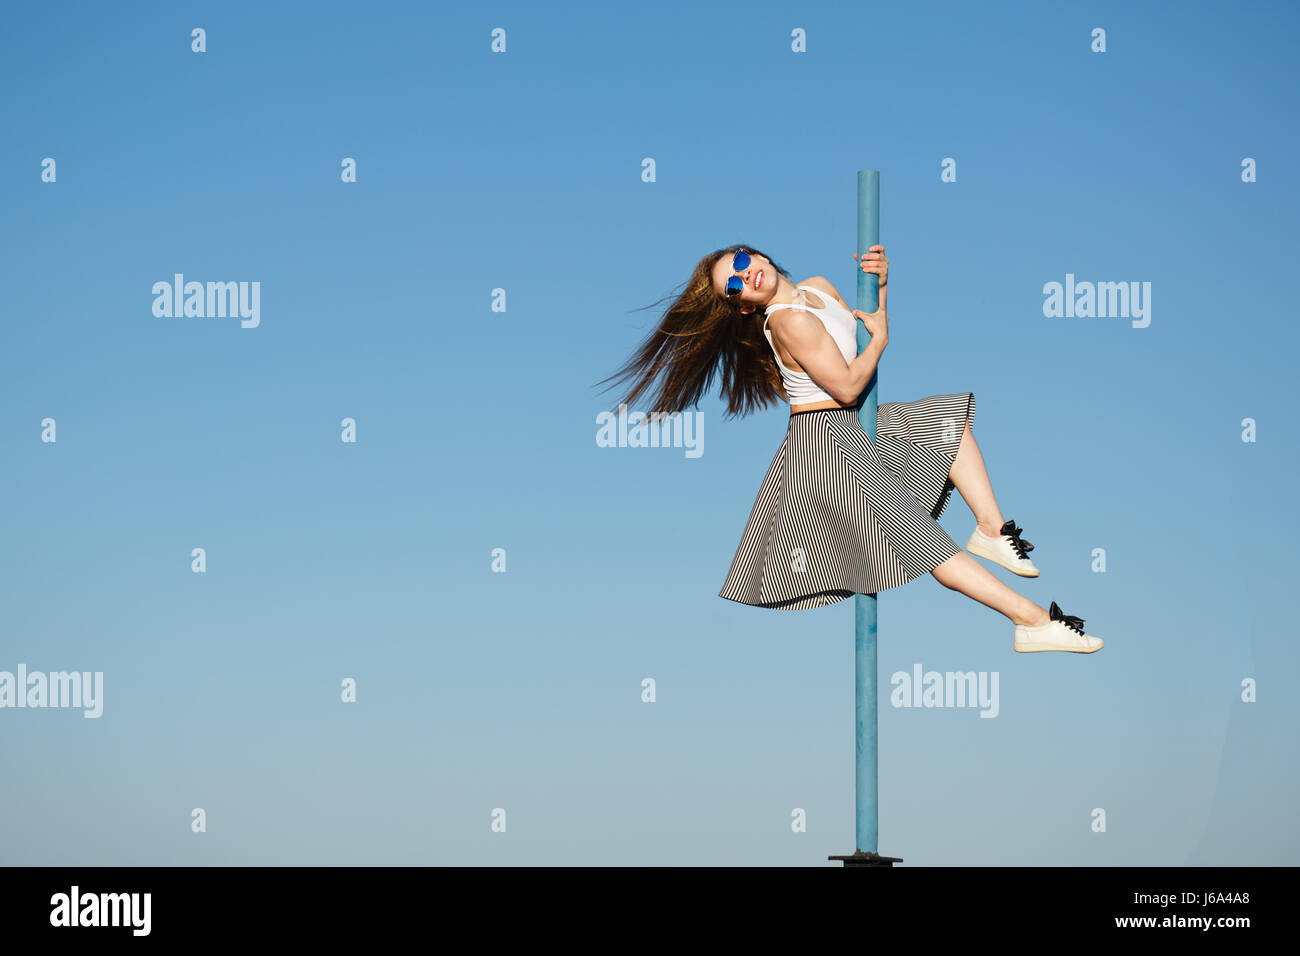 Young attractive girl hipster dancing on the pole. She is dressed in a top, skirt and sunglasses. Flying hair. The concept of life in motion. Stock Photo